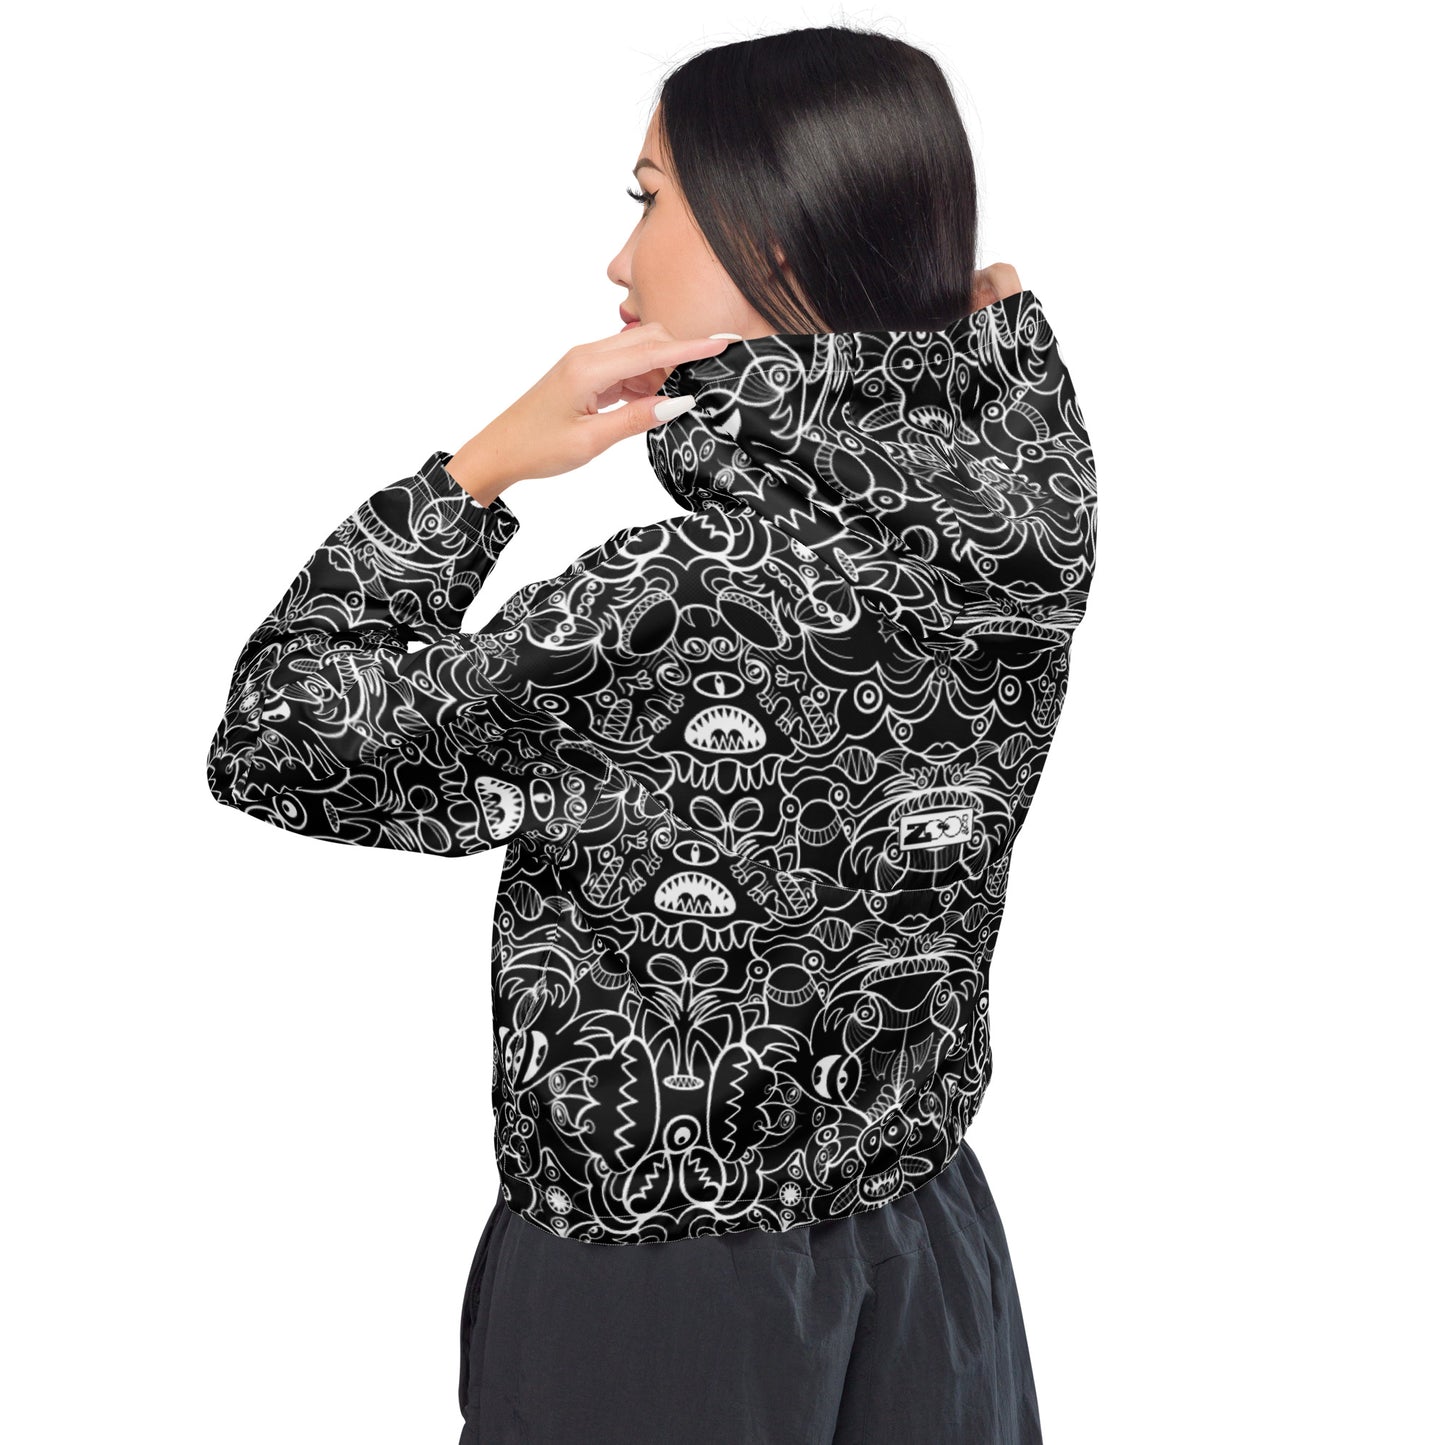 The powerful dark side of the Doodle world Women’s cropped windbreaker. Back view